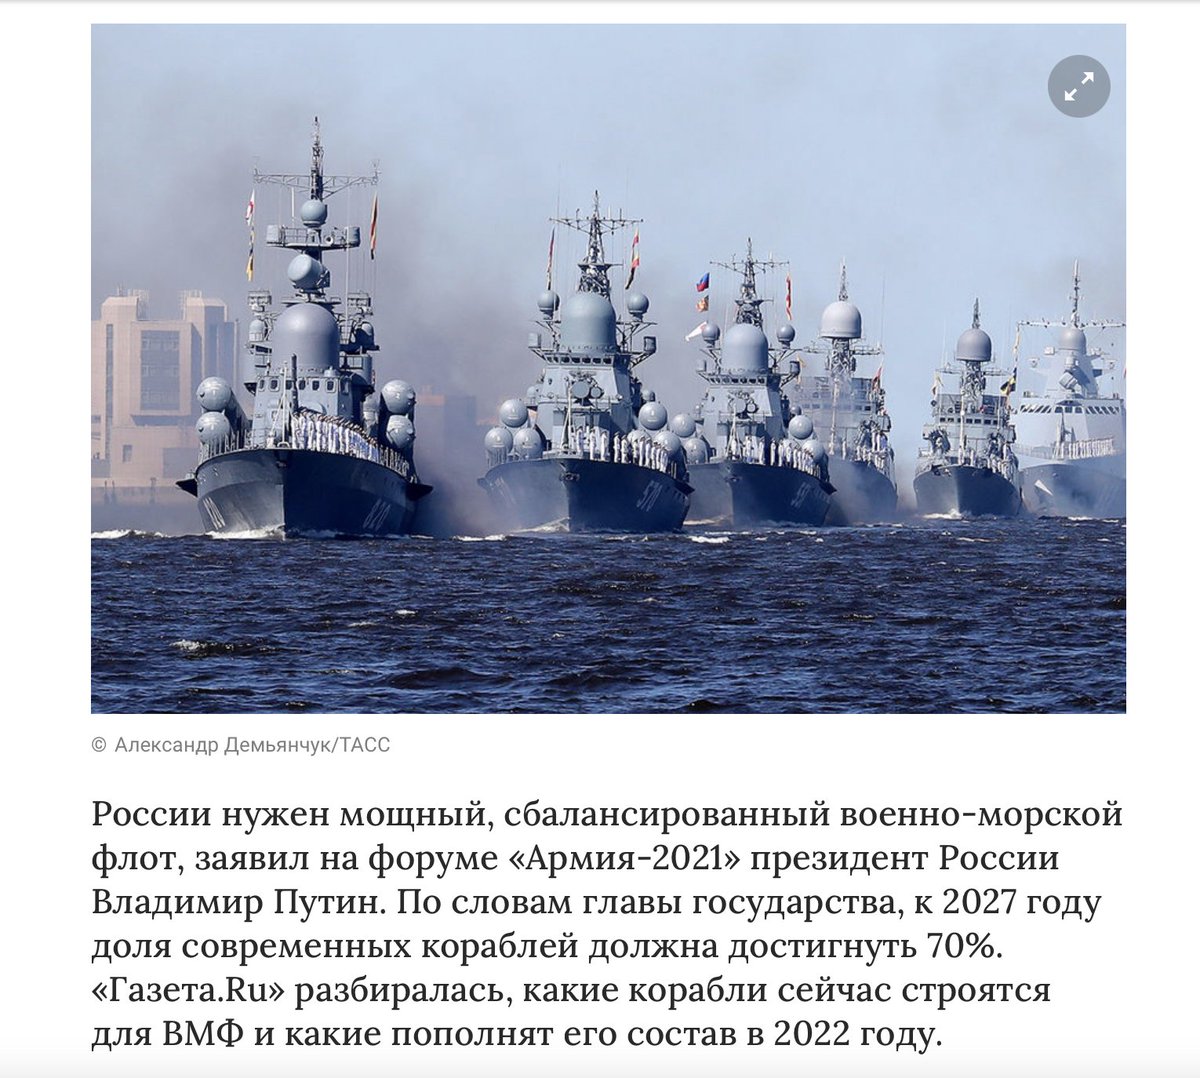 And Russia is PR-maxing. Putin declared that the share of new ships should reach 70% by 2027. Old Soviet ships are becoming obsolete, Russia's building new ones. BUT. Major Soviet shipyards are located in Ukraine. So now Russia expands shipyard infrastructure to reach this goal